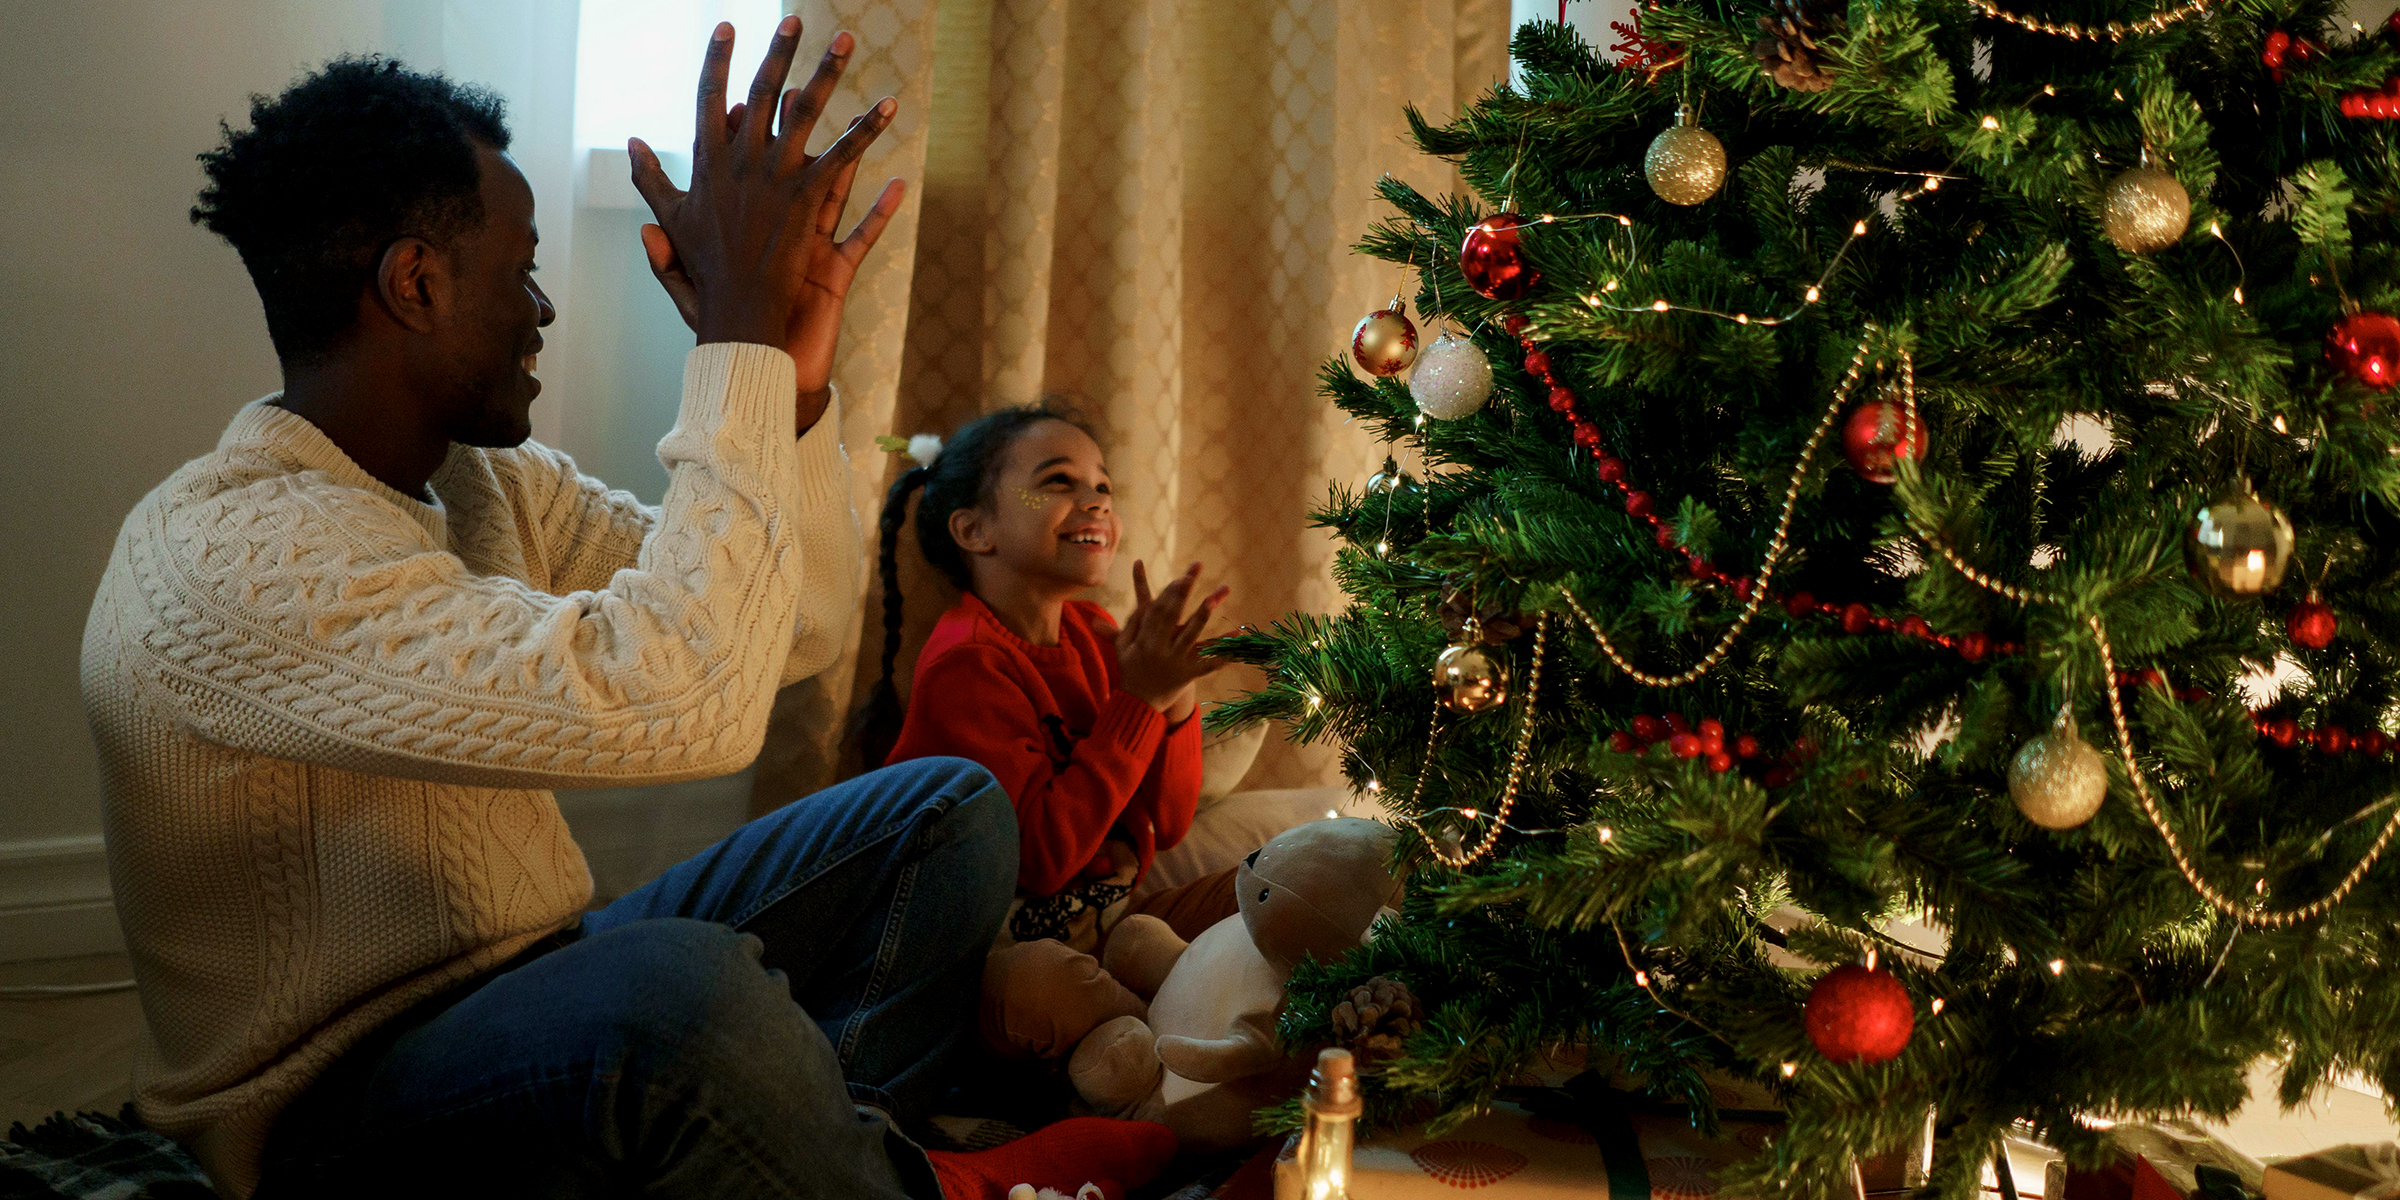 A father and daughter sitting by a Christmas tree | Source: Pexels